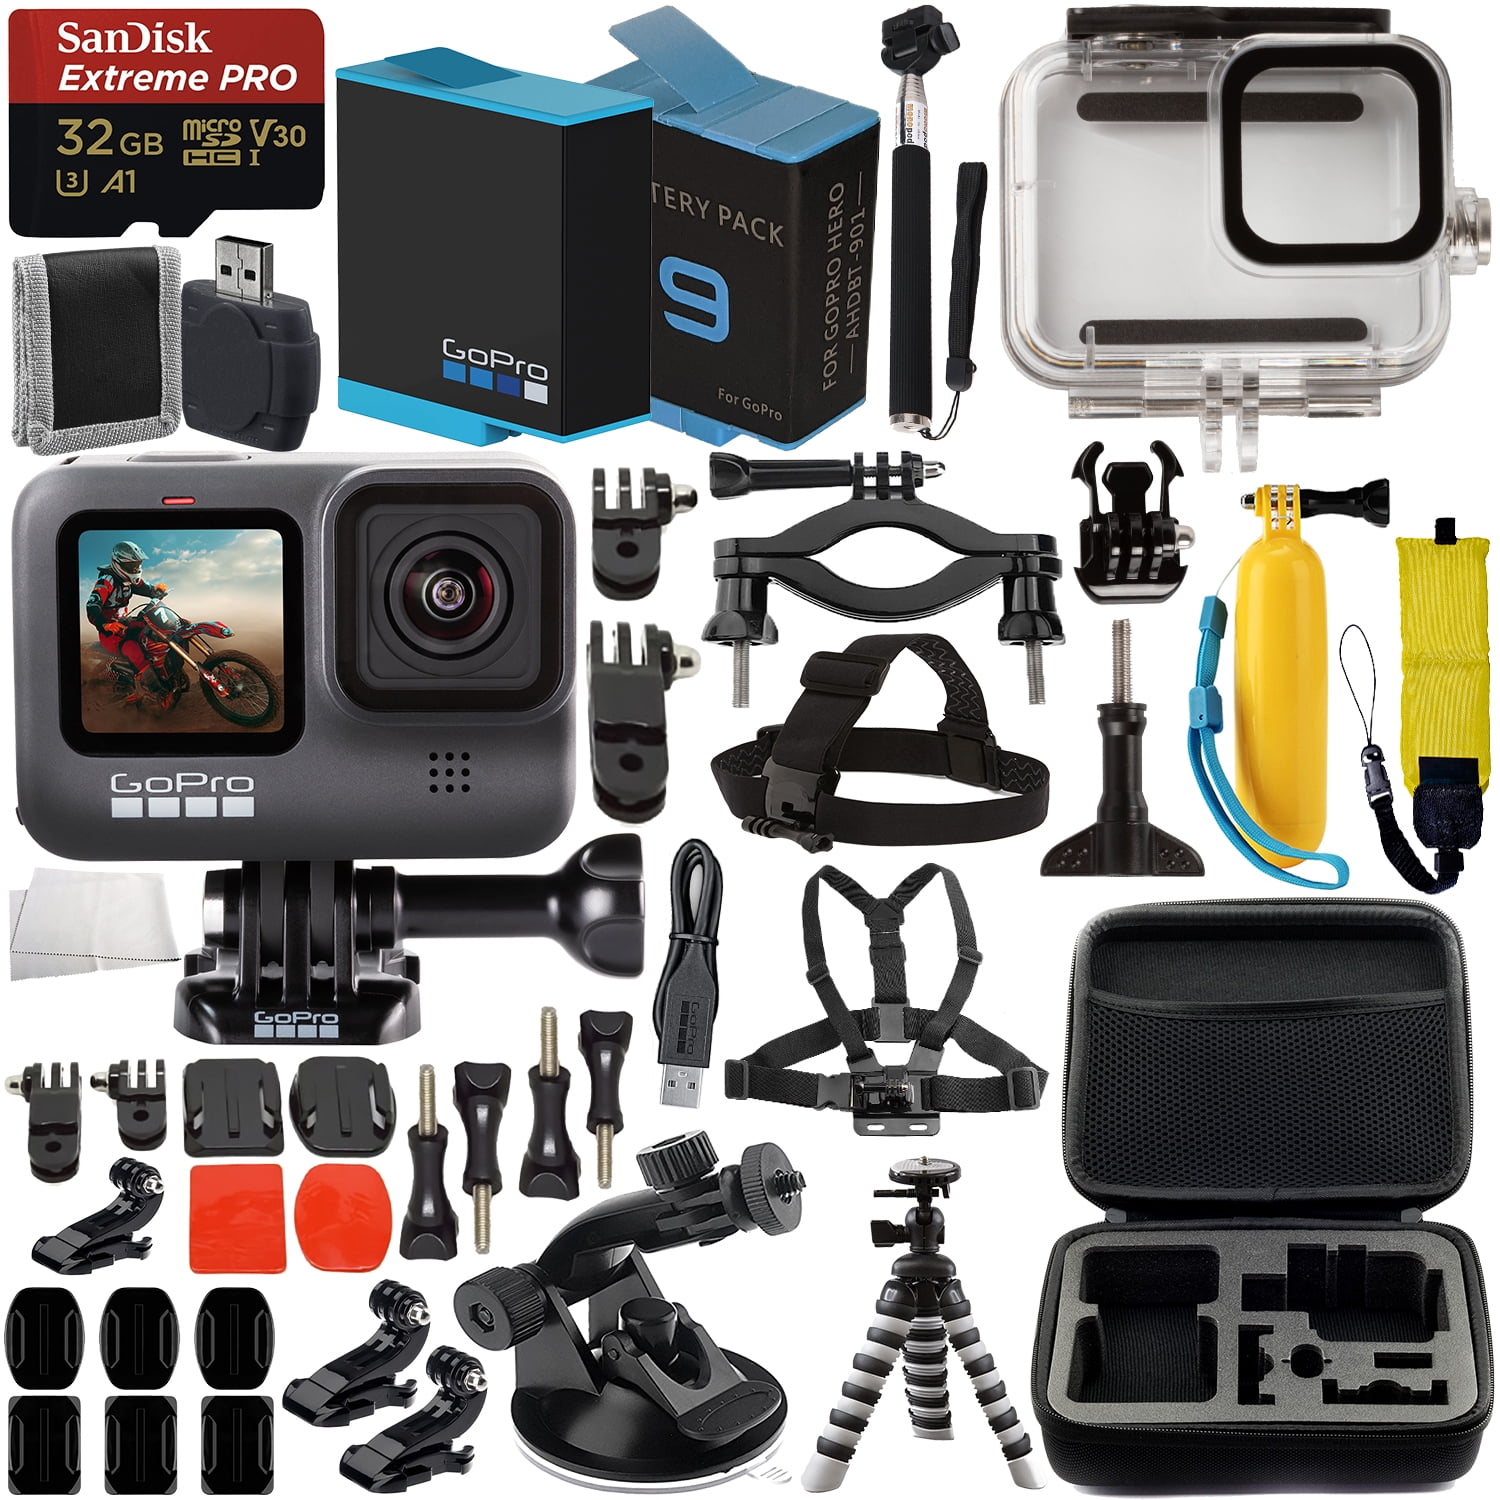 KSIX Pro   Pack of Accessories for Gopro Camera Sports Camera or Digital Camera